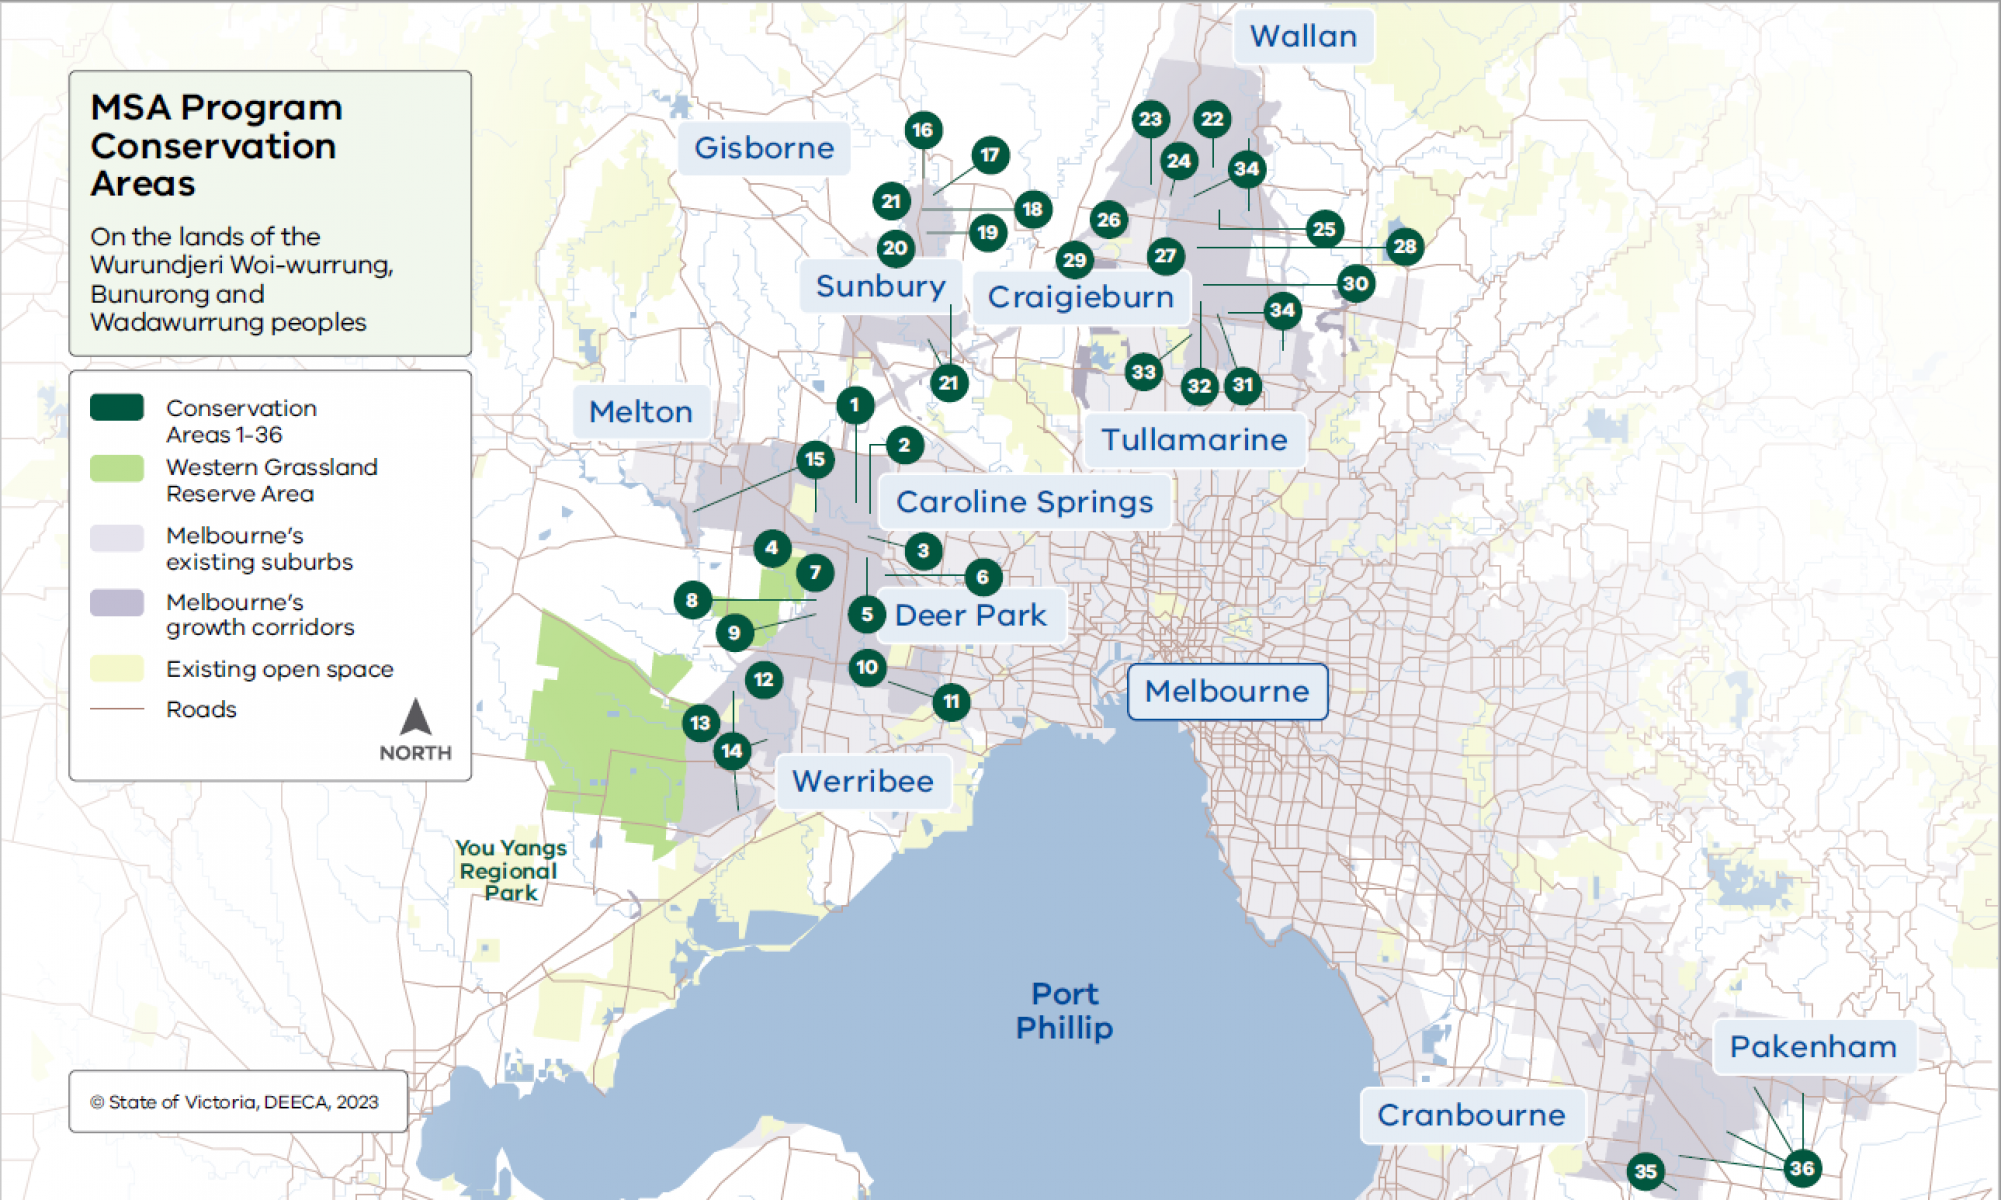 Map of the MSA program conservation areas. Conservations Areas 1-36, Western Grassland Reserve area, Melbourne's exisiting suburbs, Melbourne's groth corridors and existing open space. 